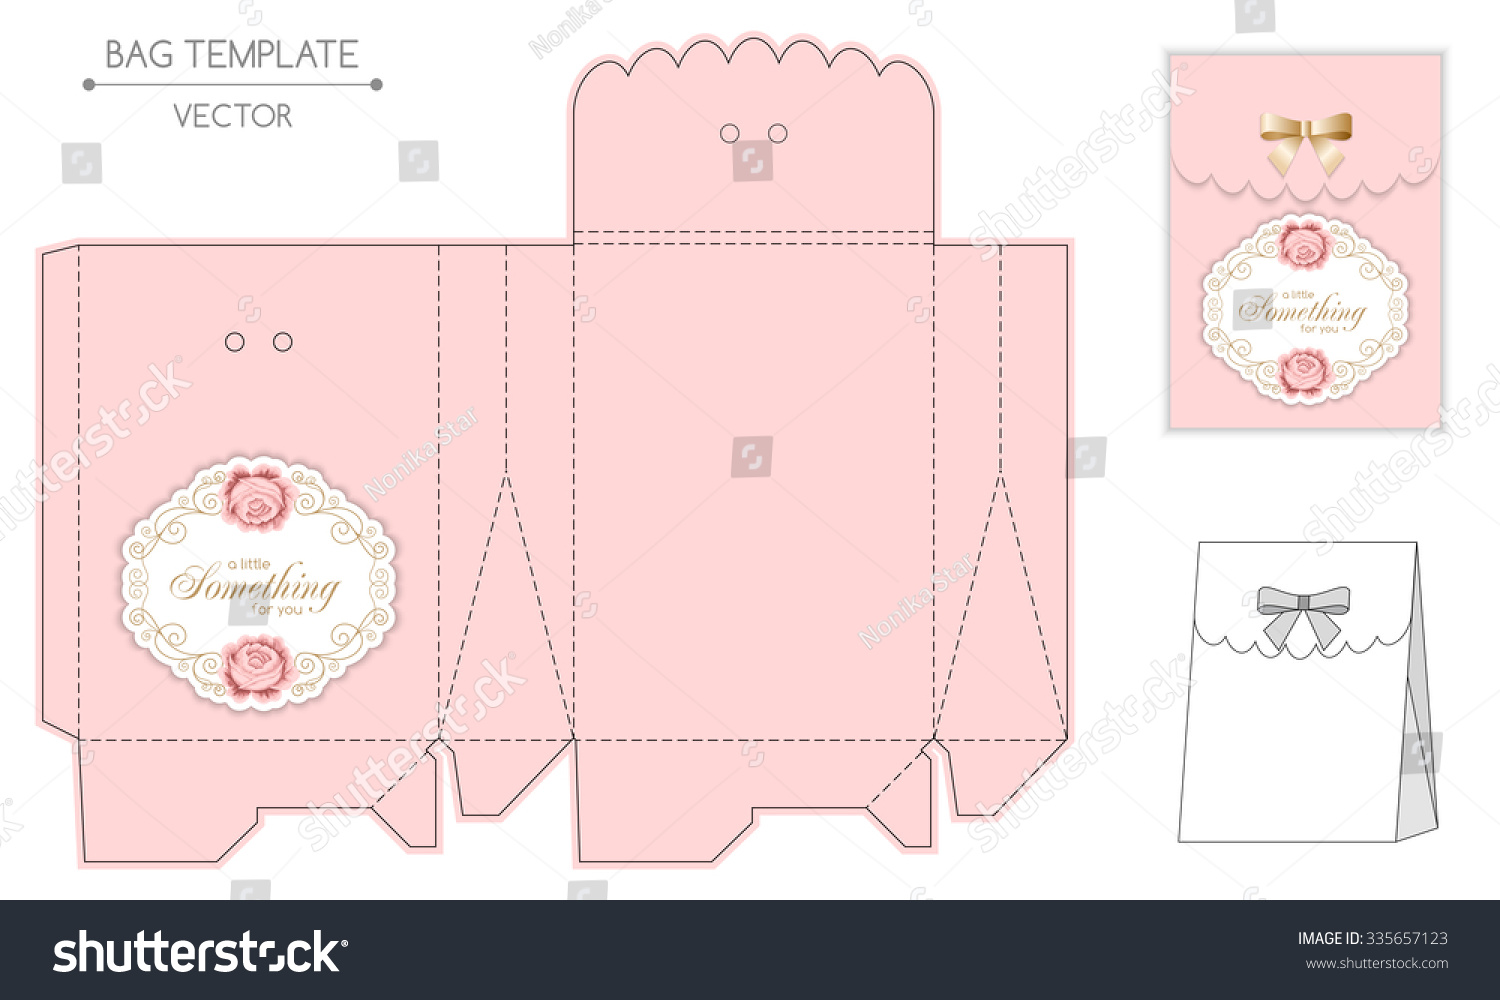 Gift Bag Template Hand Drawn Roses Stock Vector (Royalty Free) 335657123